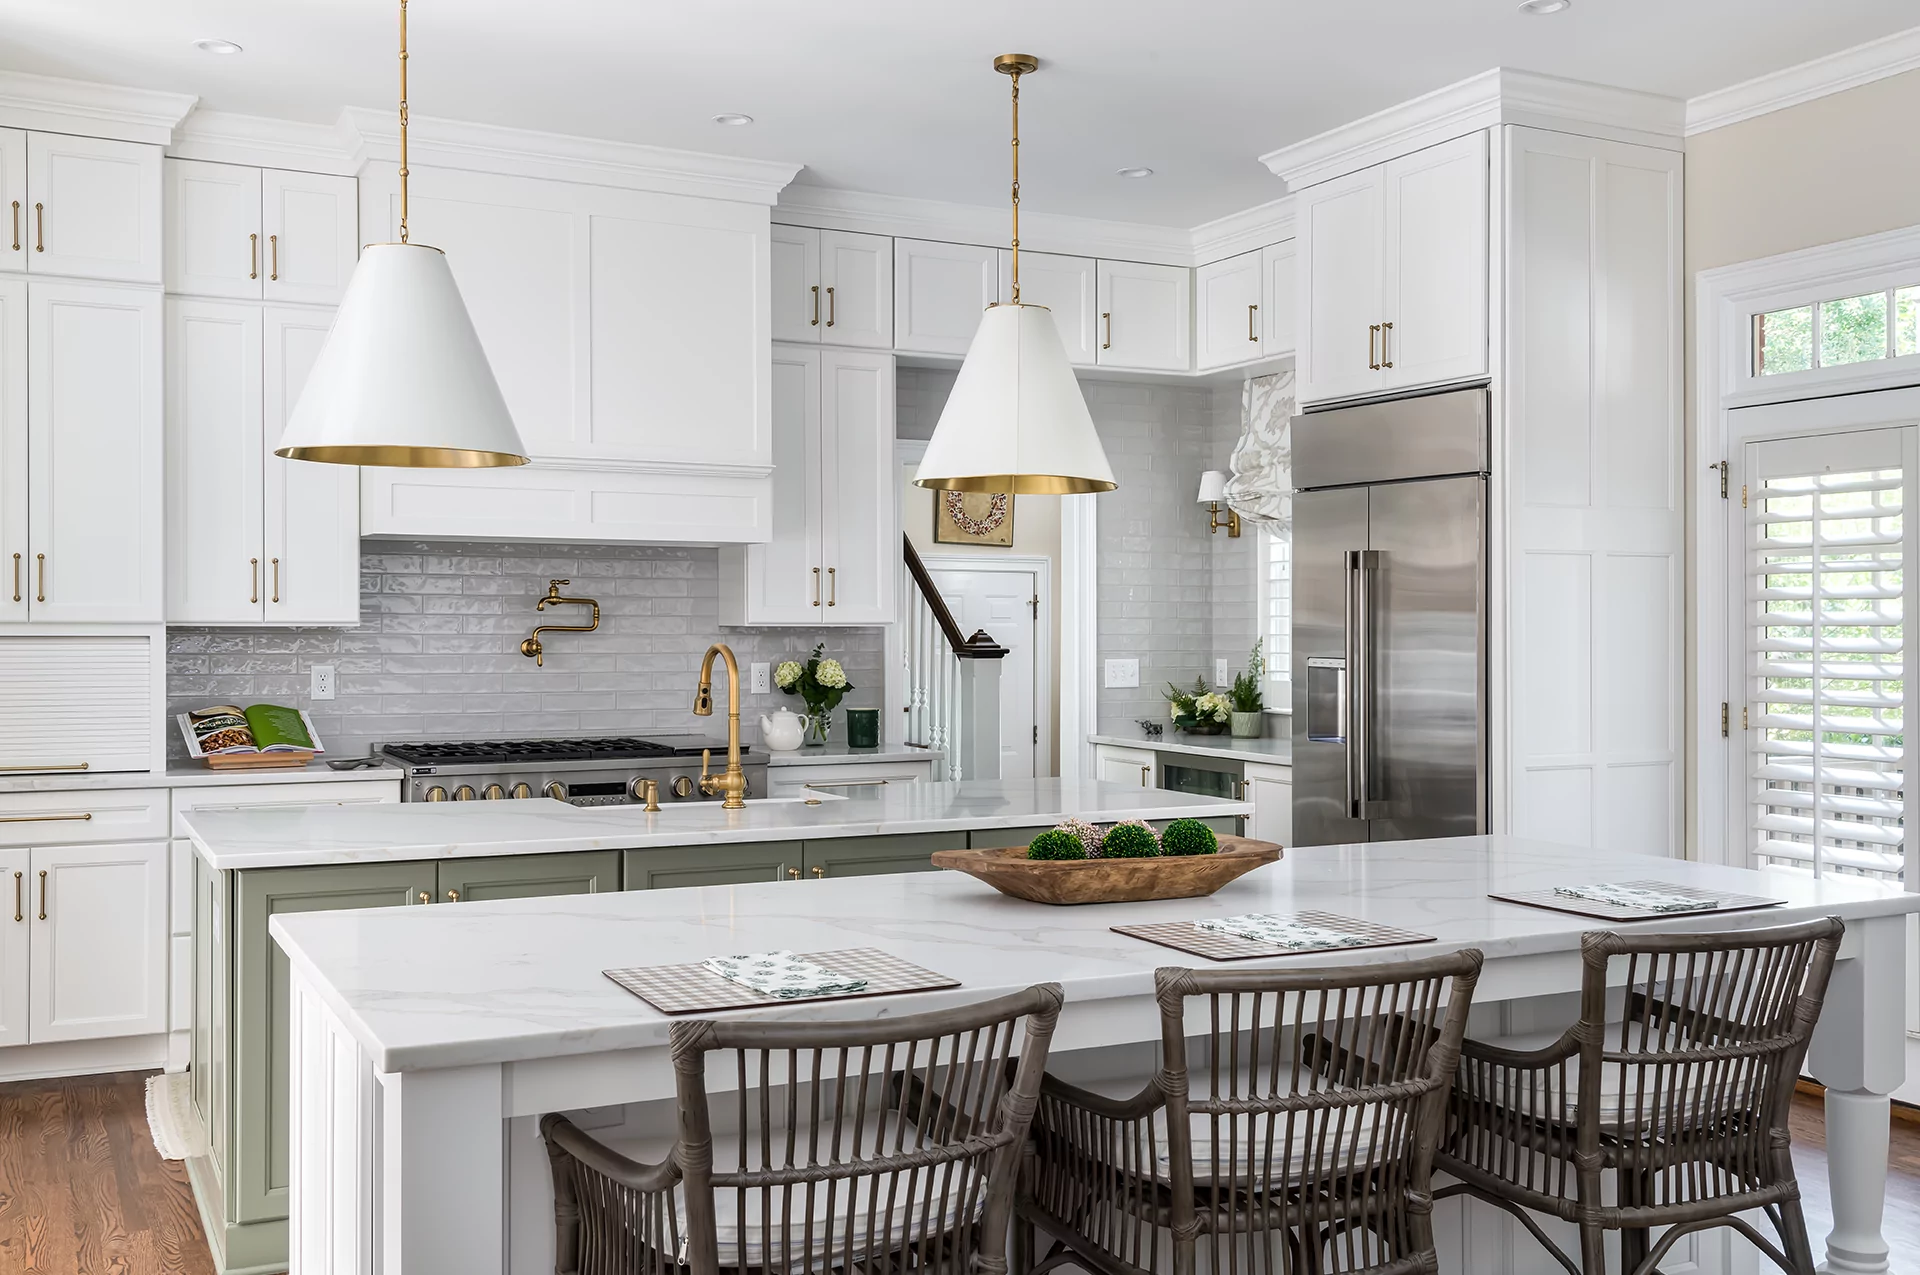 A newly remodeled kitchen with white and gold design